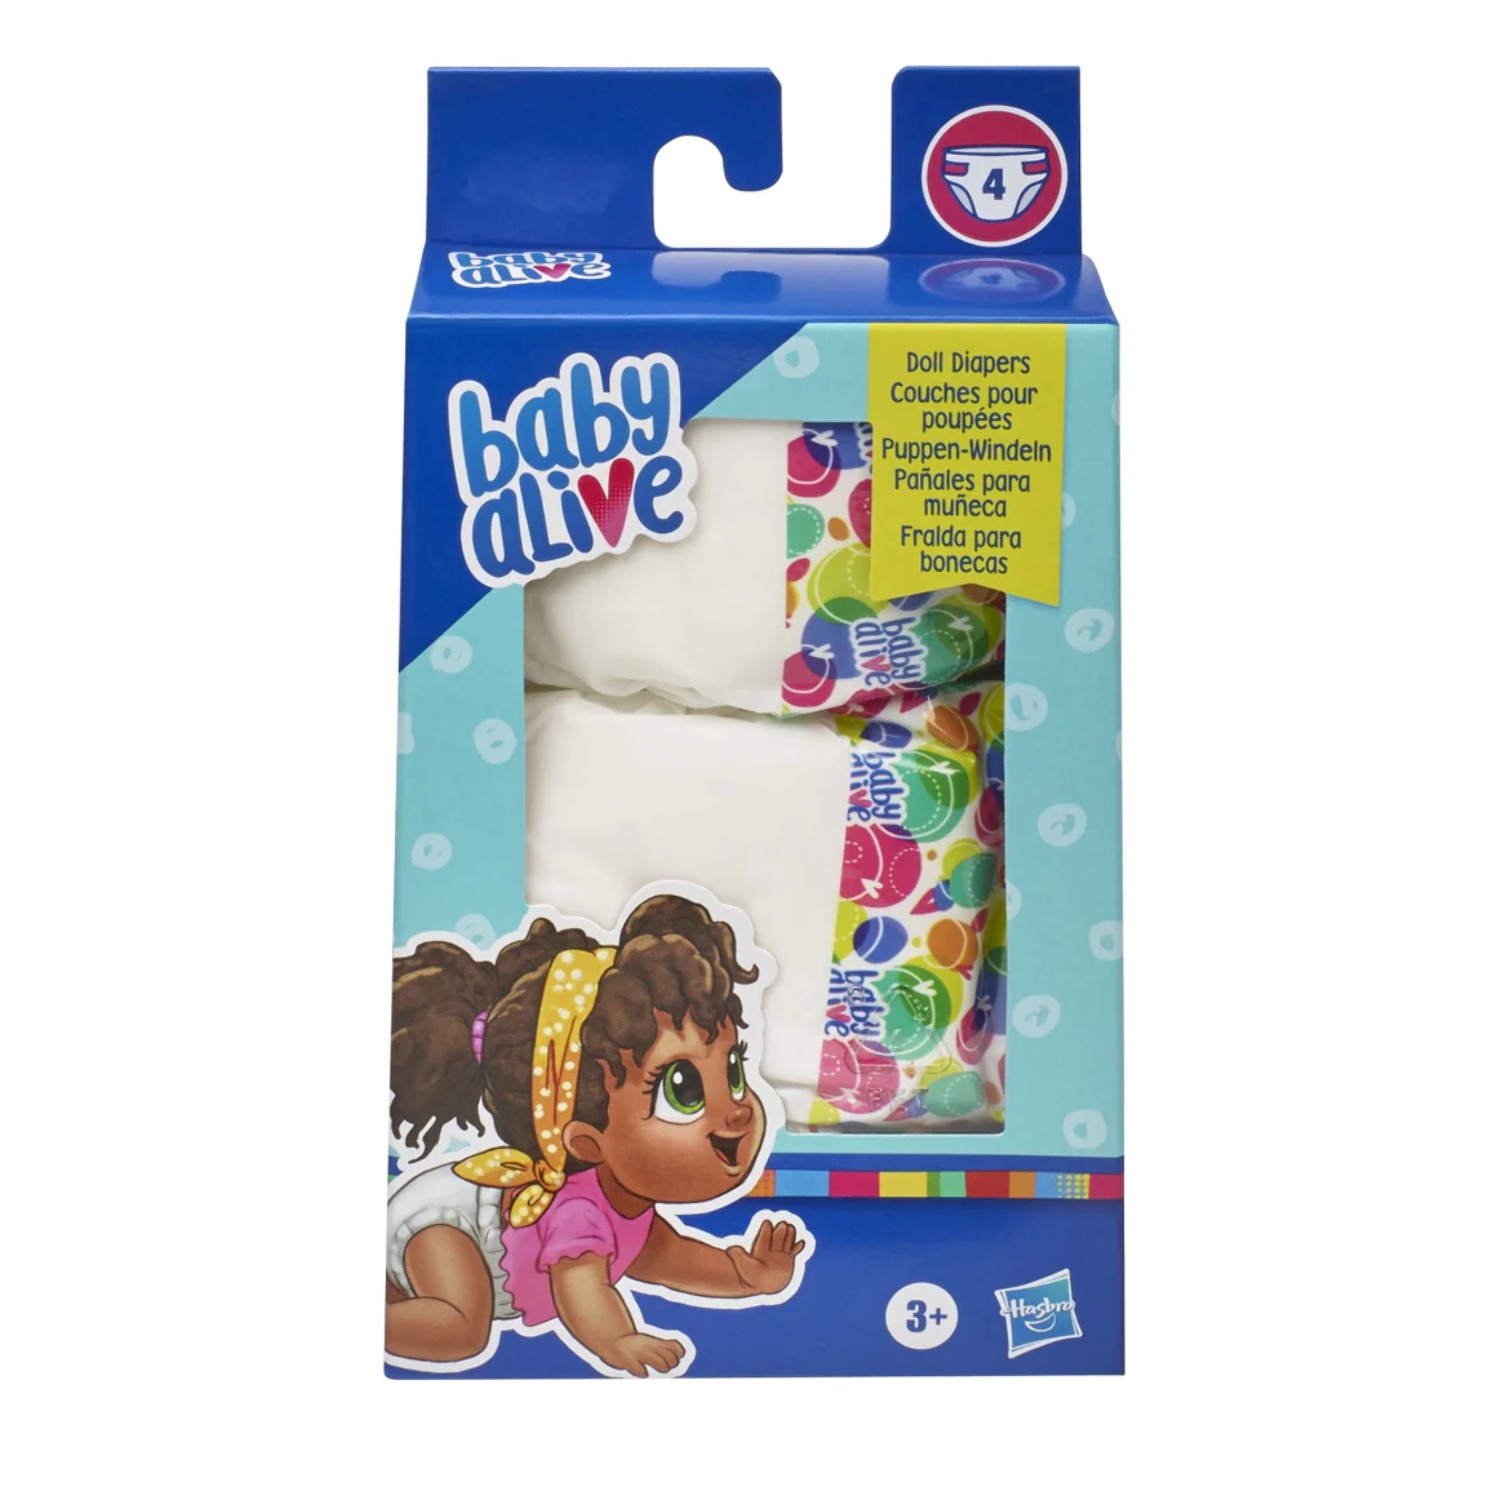 Baby Alive: Doll Diaper Accessories, 4 Count - image 3 of 5